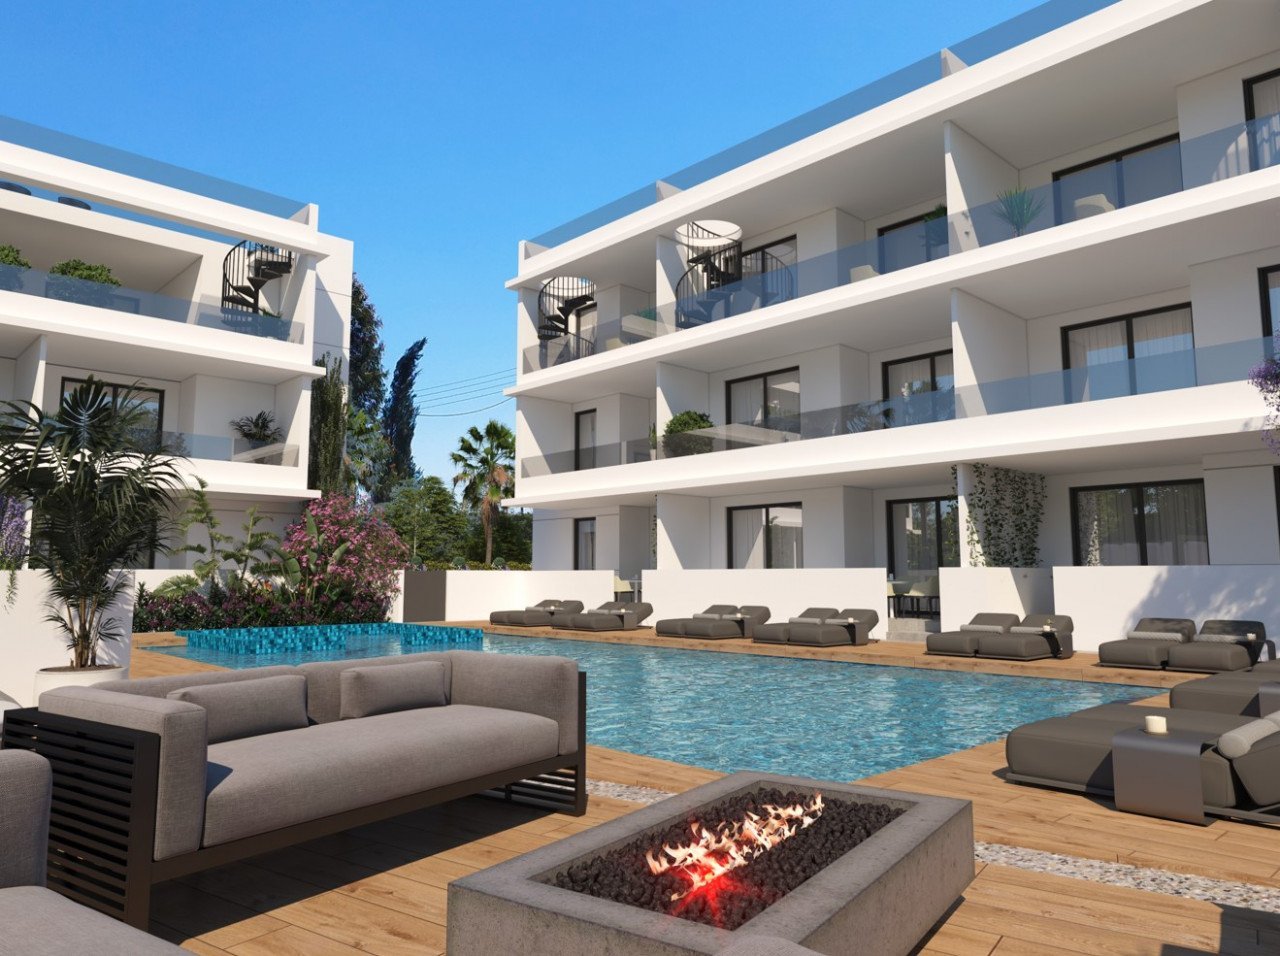 Property for Sale: Apartment (Flat) in Kapparis, Famagusta  | Key Realtor Cyprus